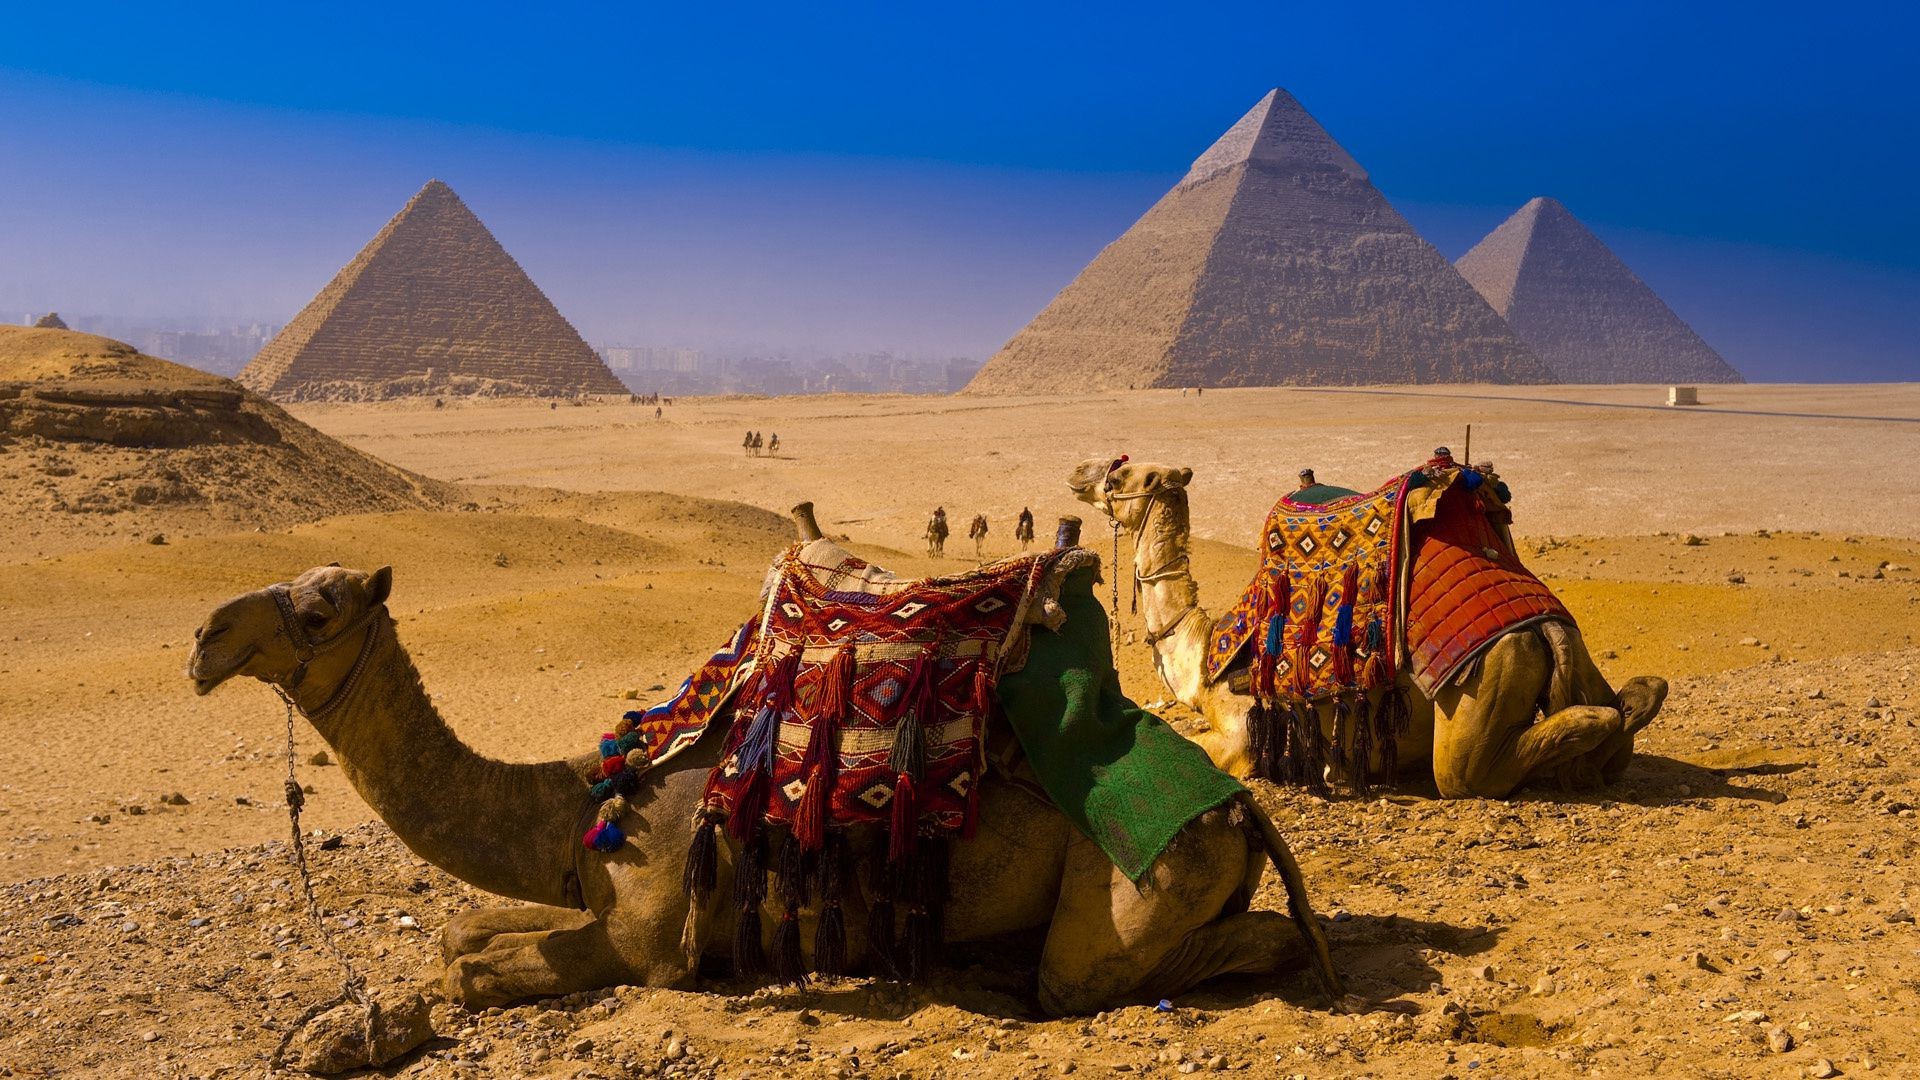 famous places camel pyramid desert bedouin sphinx travel pharaoh mammal arabian camel two grave one nomad sand sitting daylight dry train tourism